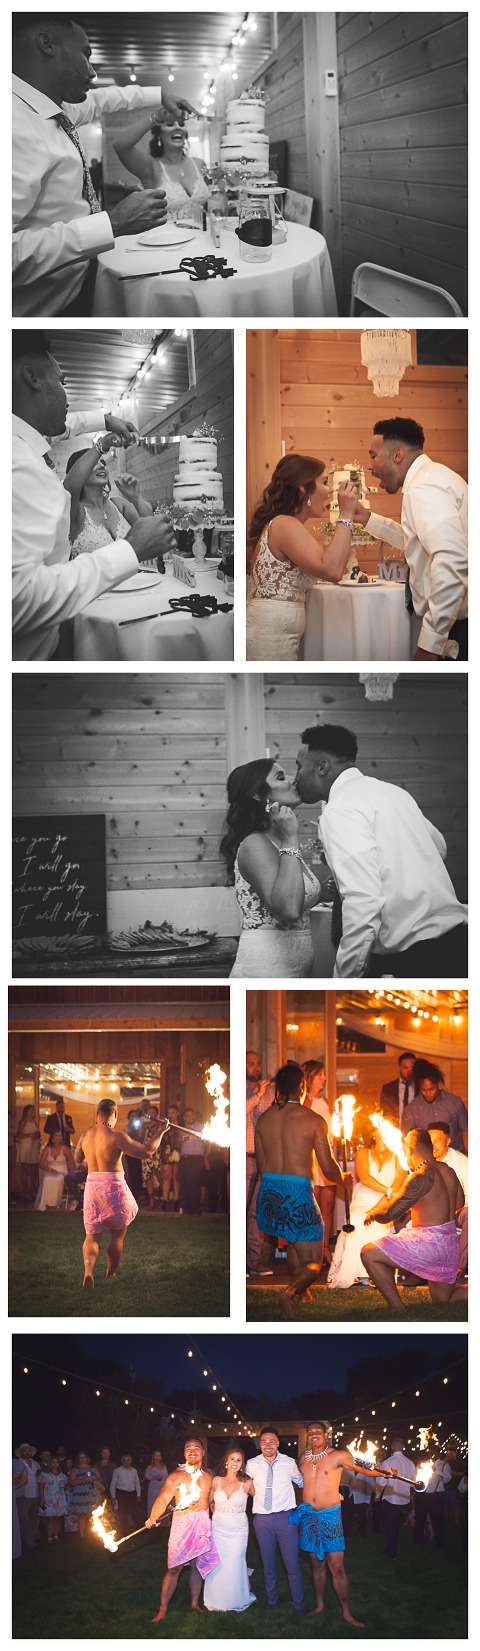 Hawaiian dancers and cake cutting photos, Jerome & Michelle married at McInosh barn in Ellensburg photographed by Hailey Haberman Ellensburg Wedding Photographer